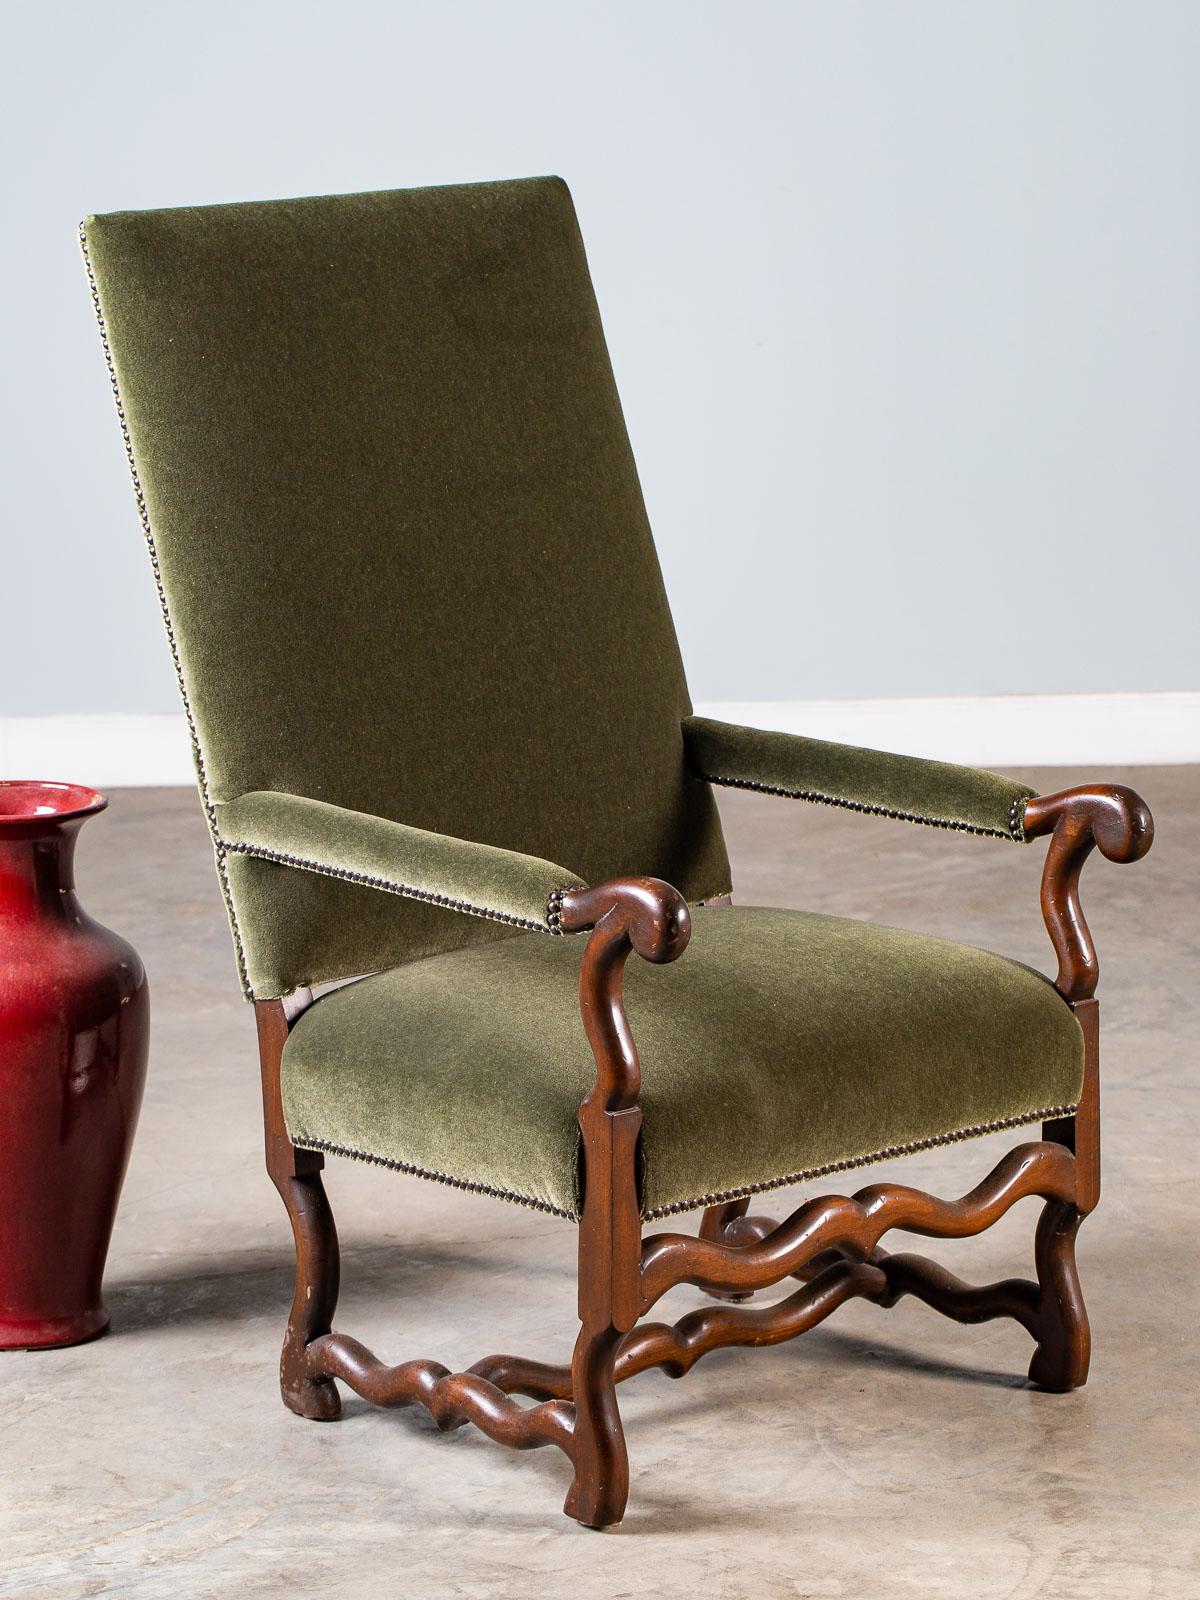 Modern French Louis XIII Os de Mouton Leg Chair, circa 2000 In Good Condition For Sale In Houston, TX